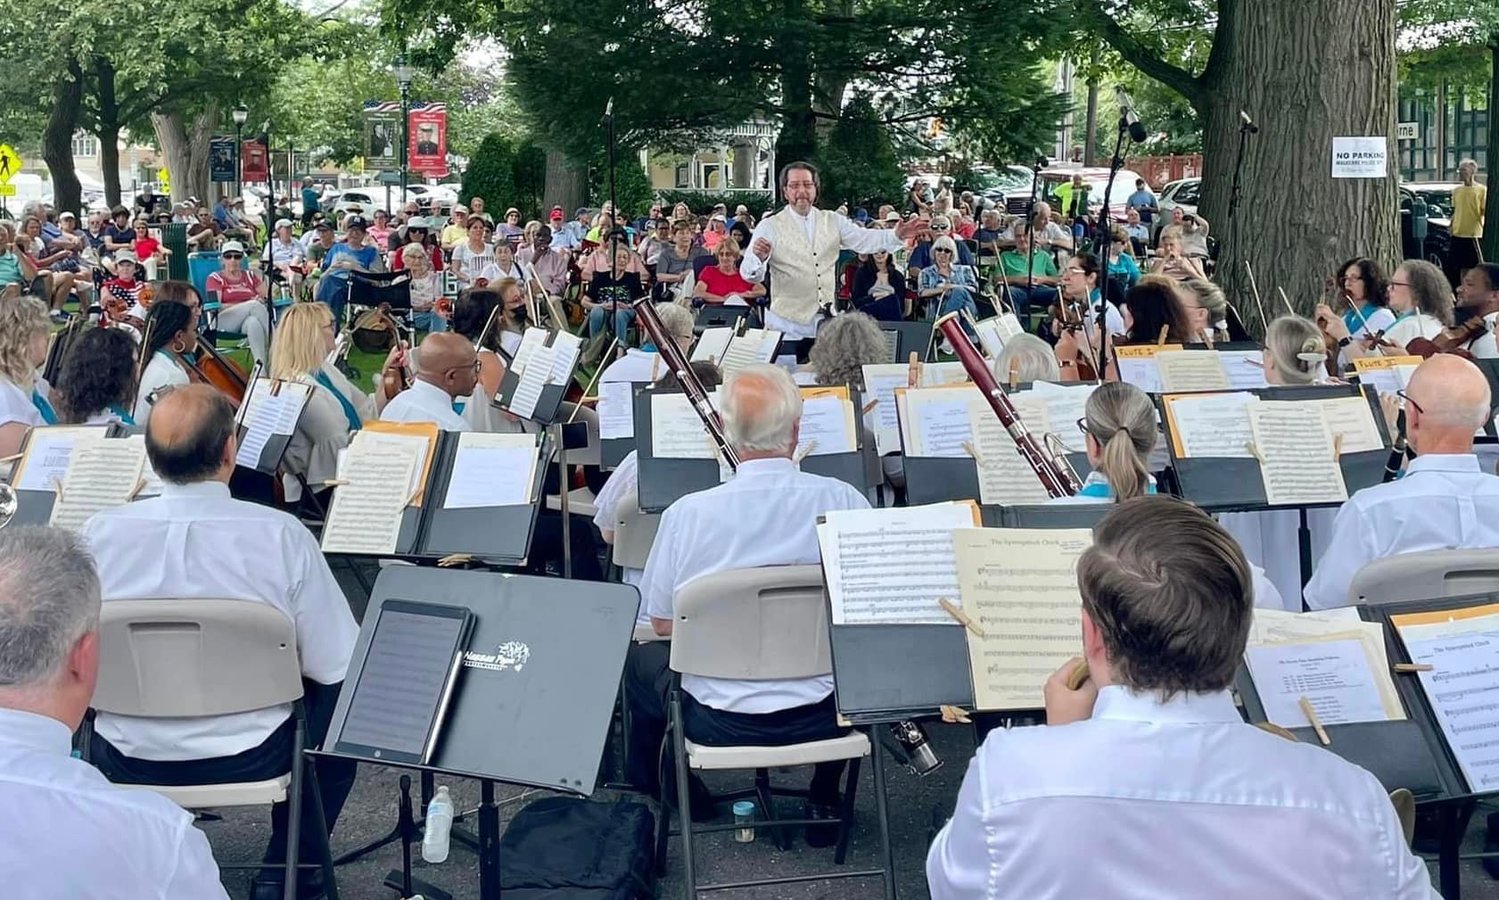 Maestro Louis Panacciulli and the Nassau Pops Symphony Orchestra entertained crowds in Malverne’s Gazebo Park with selections from film, theater and more.